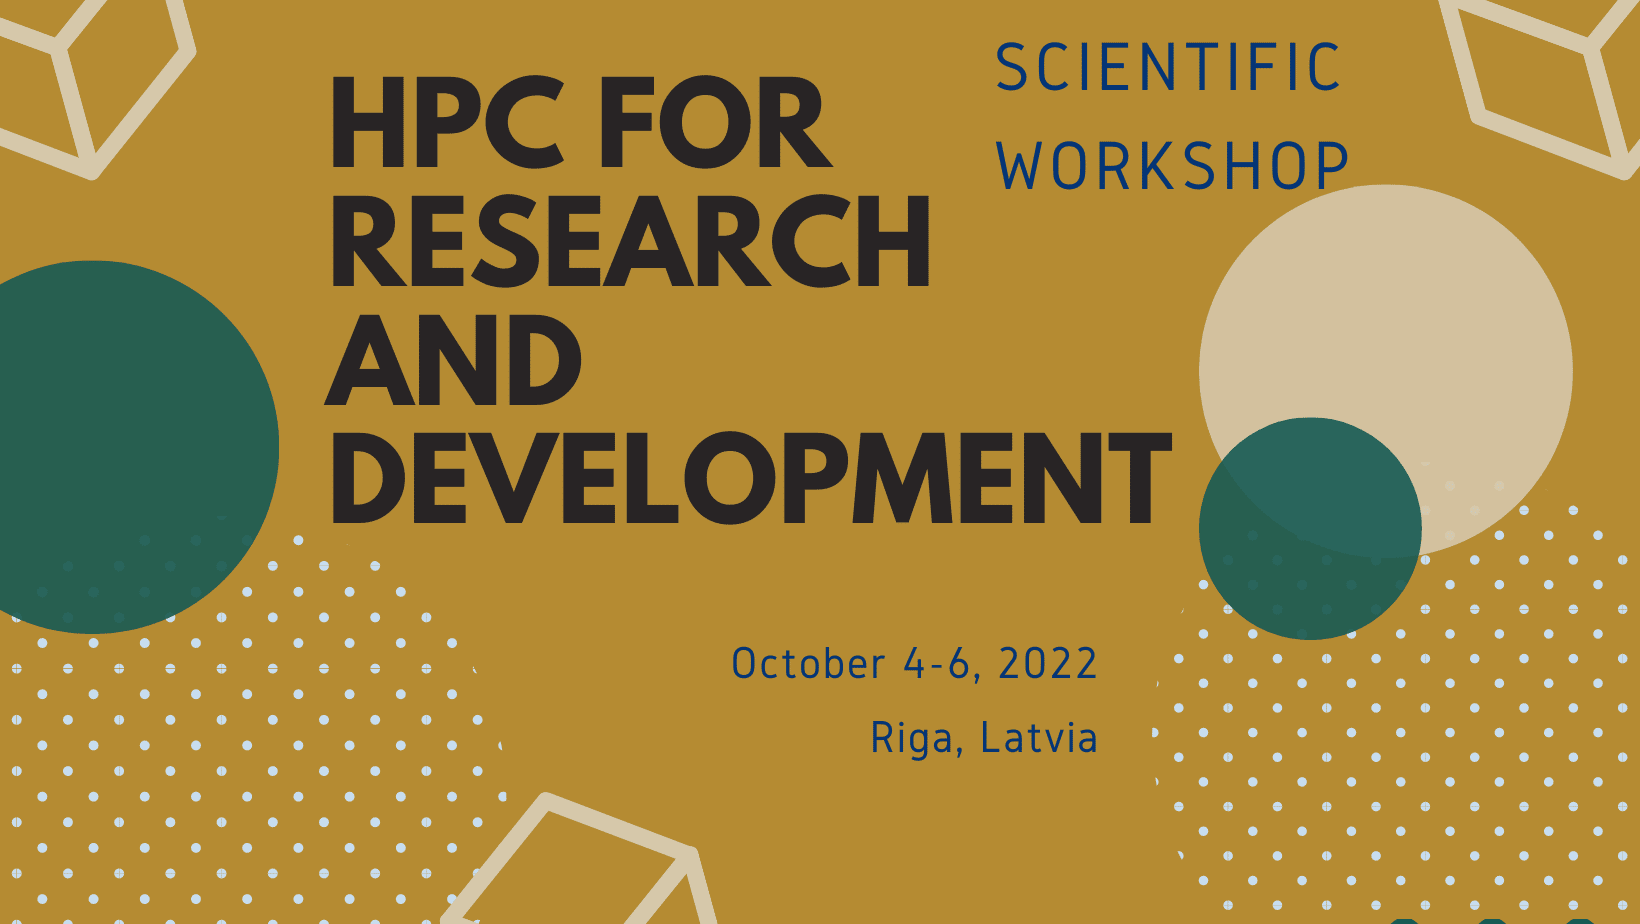 NCC-Latvia: Attend the workshop “HPC for research and development” on October 4-6